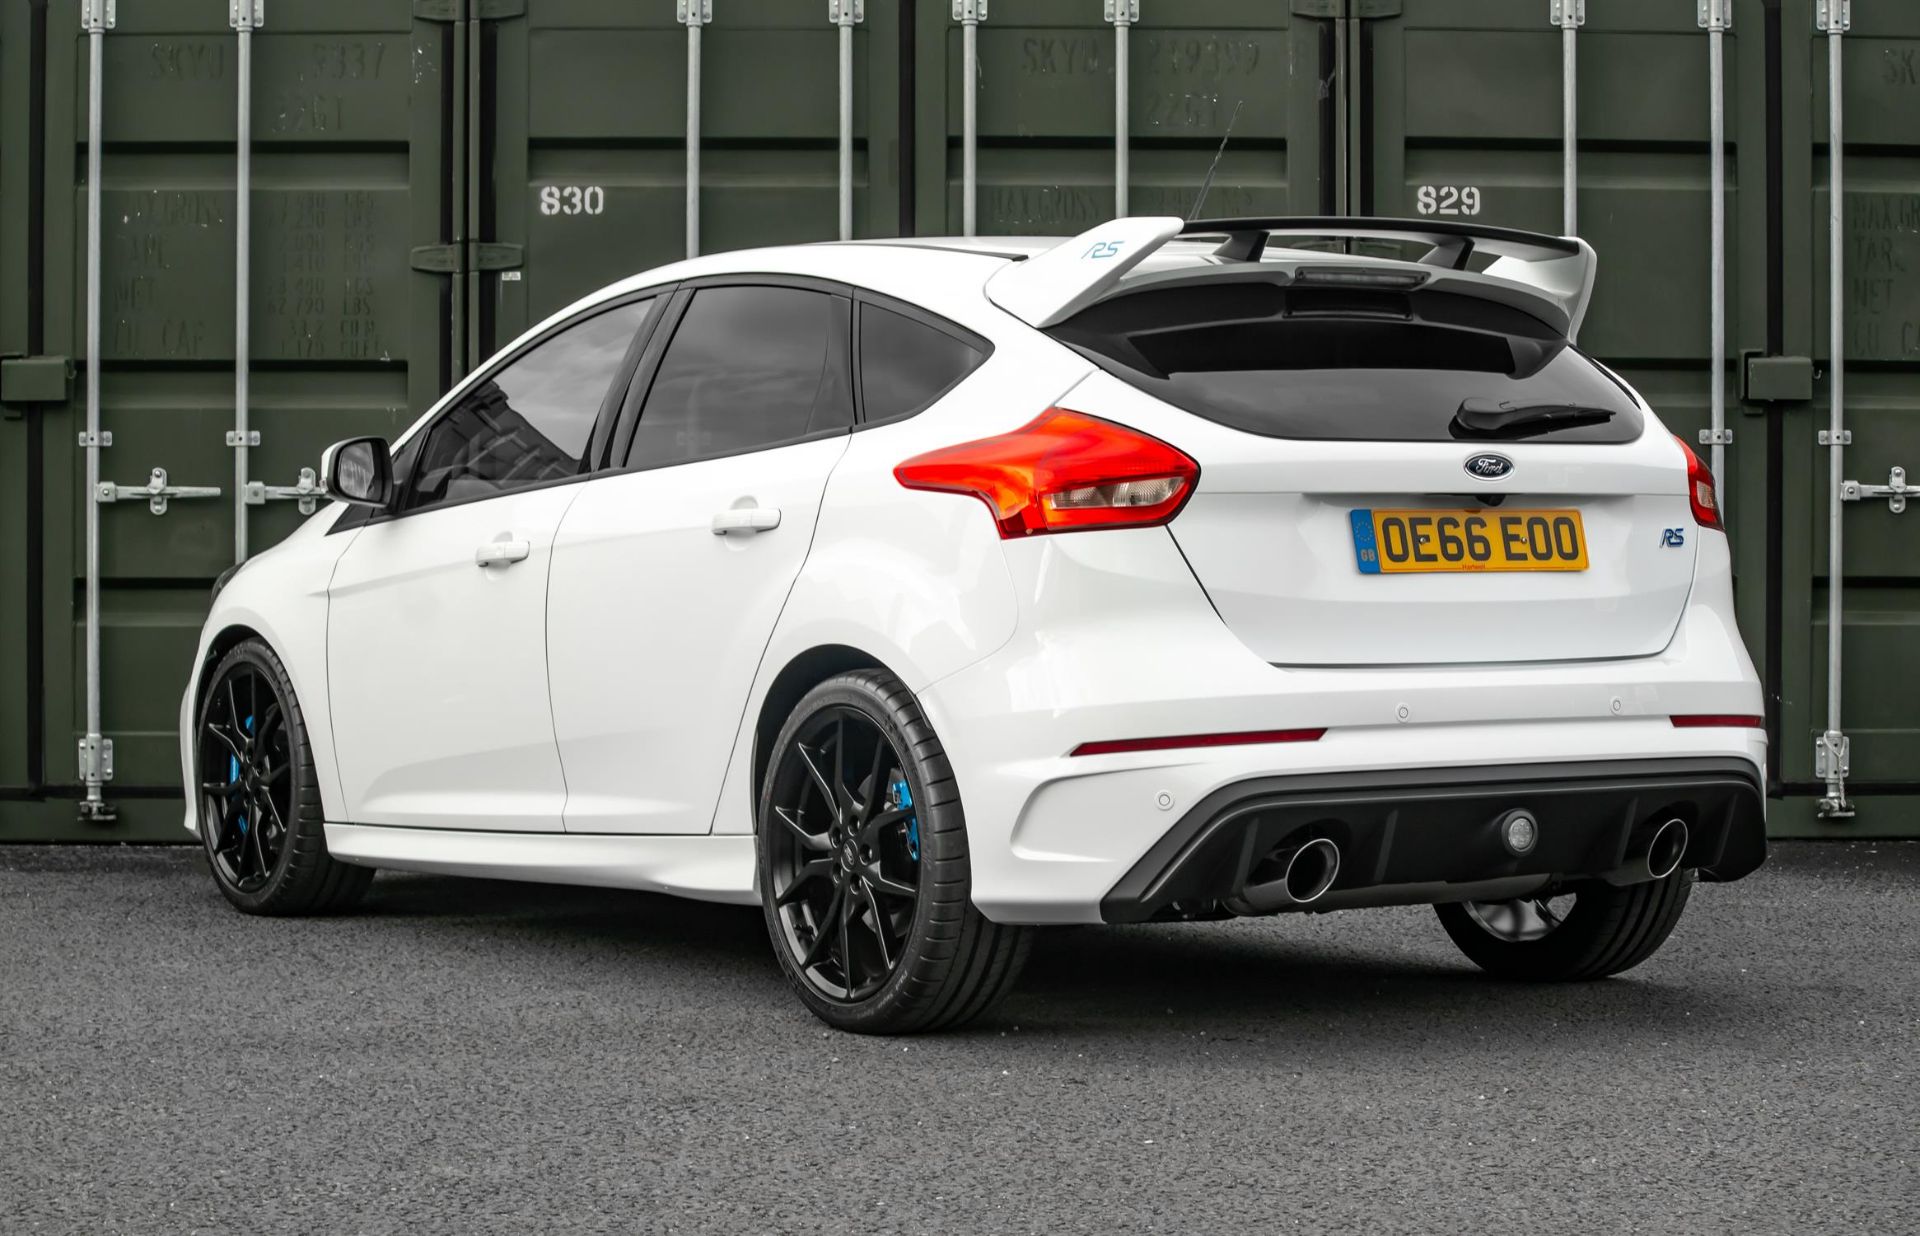 2016 Ford Focus RS Mk3 - Image 4 of 10